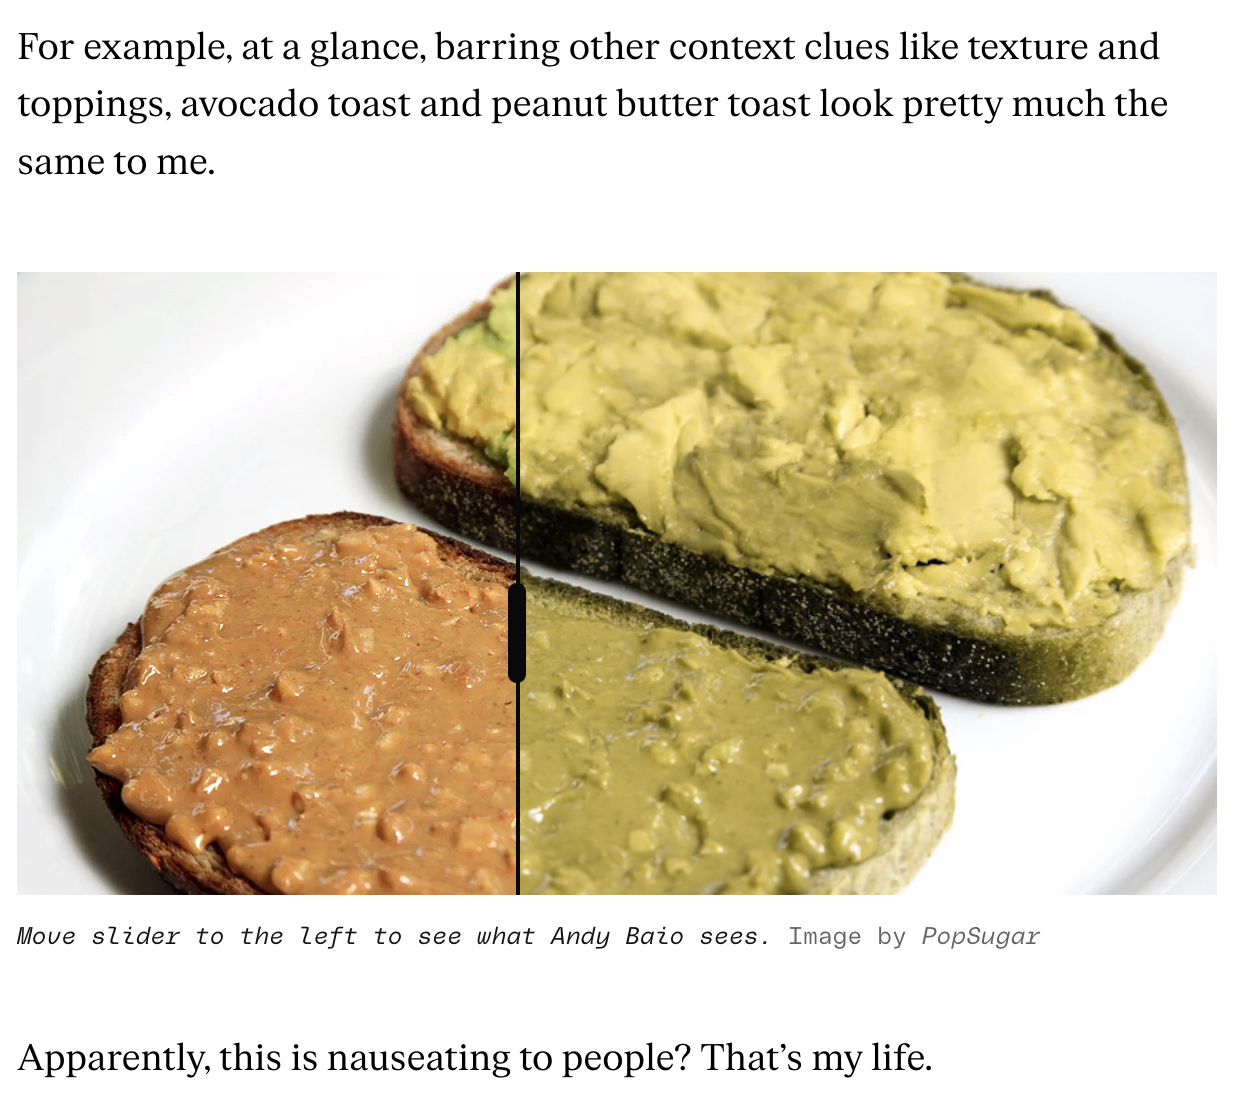 "For example, at a glance, barring other context clues like texture and toppings, avocado toast and peanut butter toast look pretty much the same to me." [Image of a slice of avocado toast and peanut butter toast with a slider showing on the left that they look very different and on the right they look almost identical in color/texture] "Apparently, this is nauseating to people That's my life."